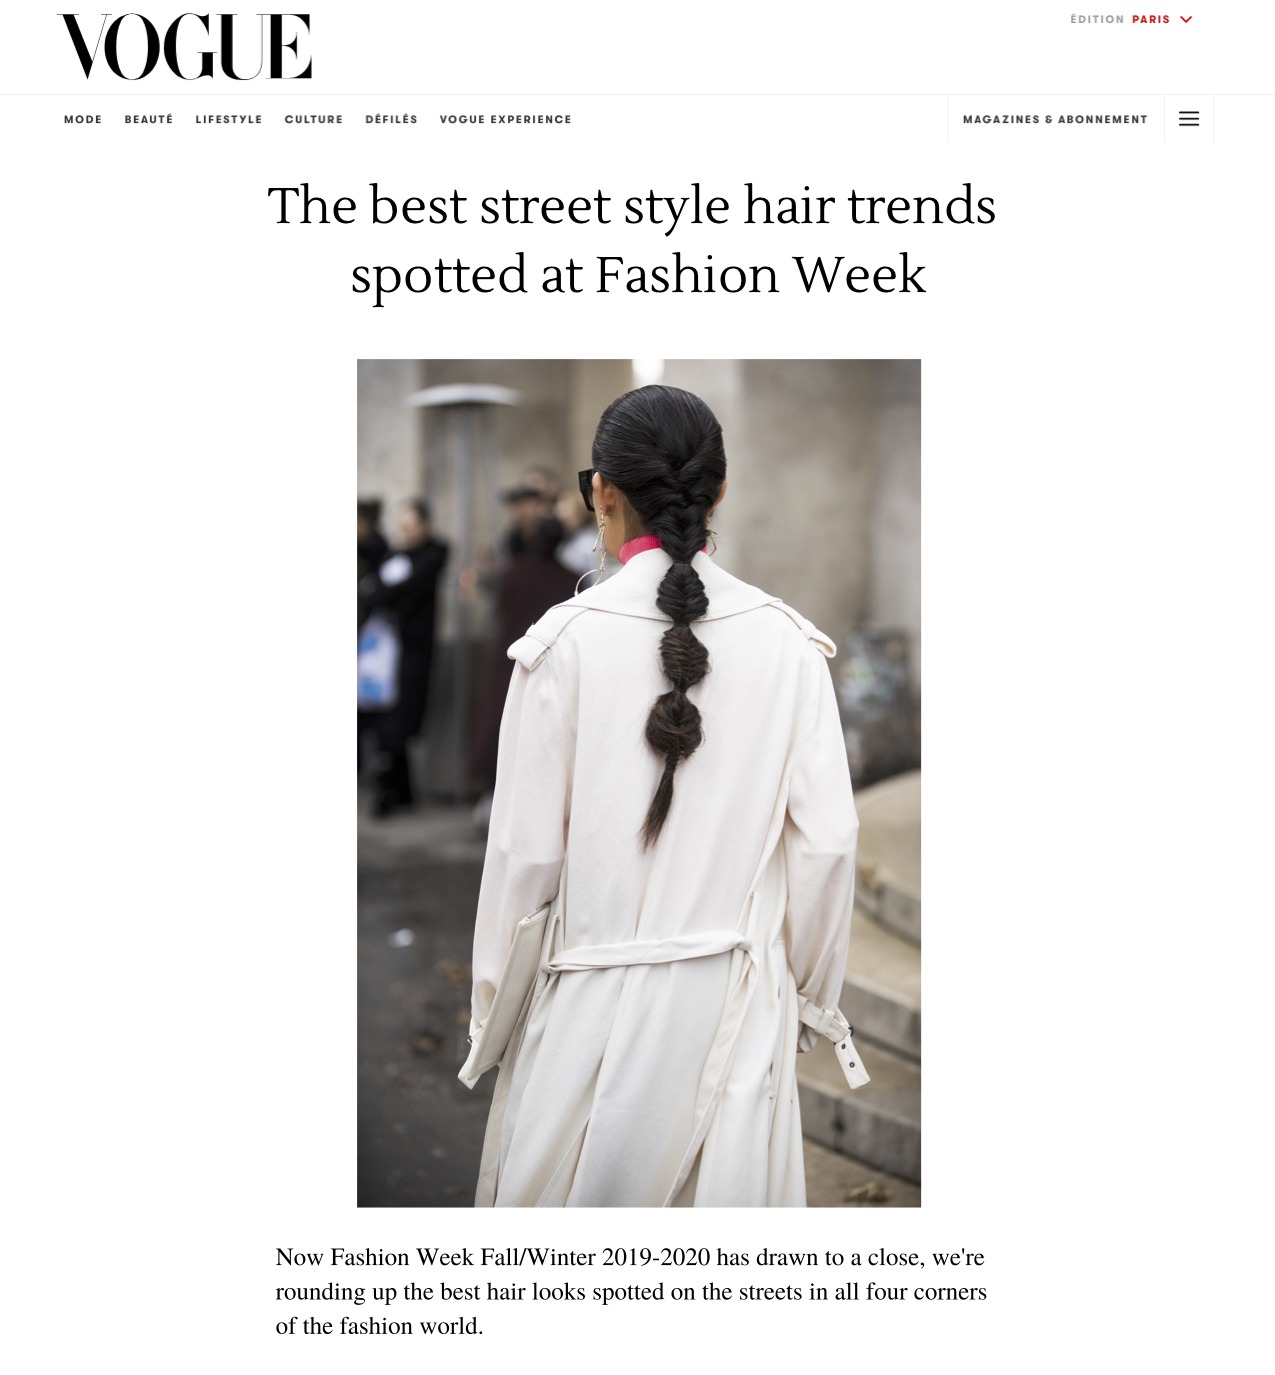 Vogue Paris: The Best Street Style Hair Trends Spotted At Fashion Week